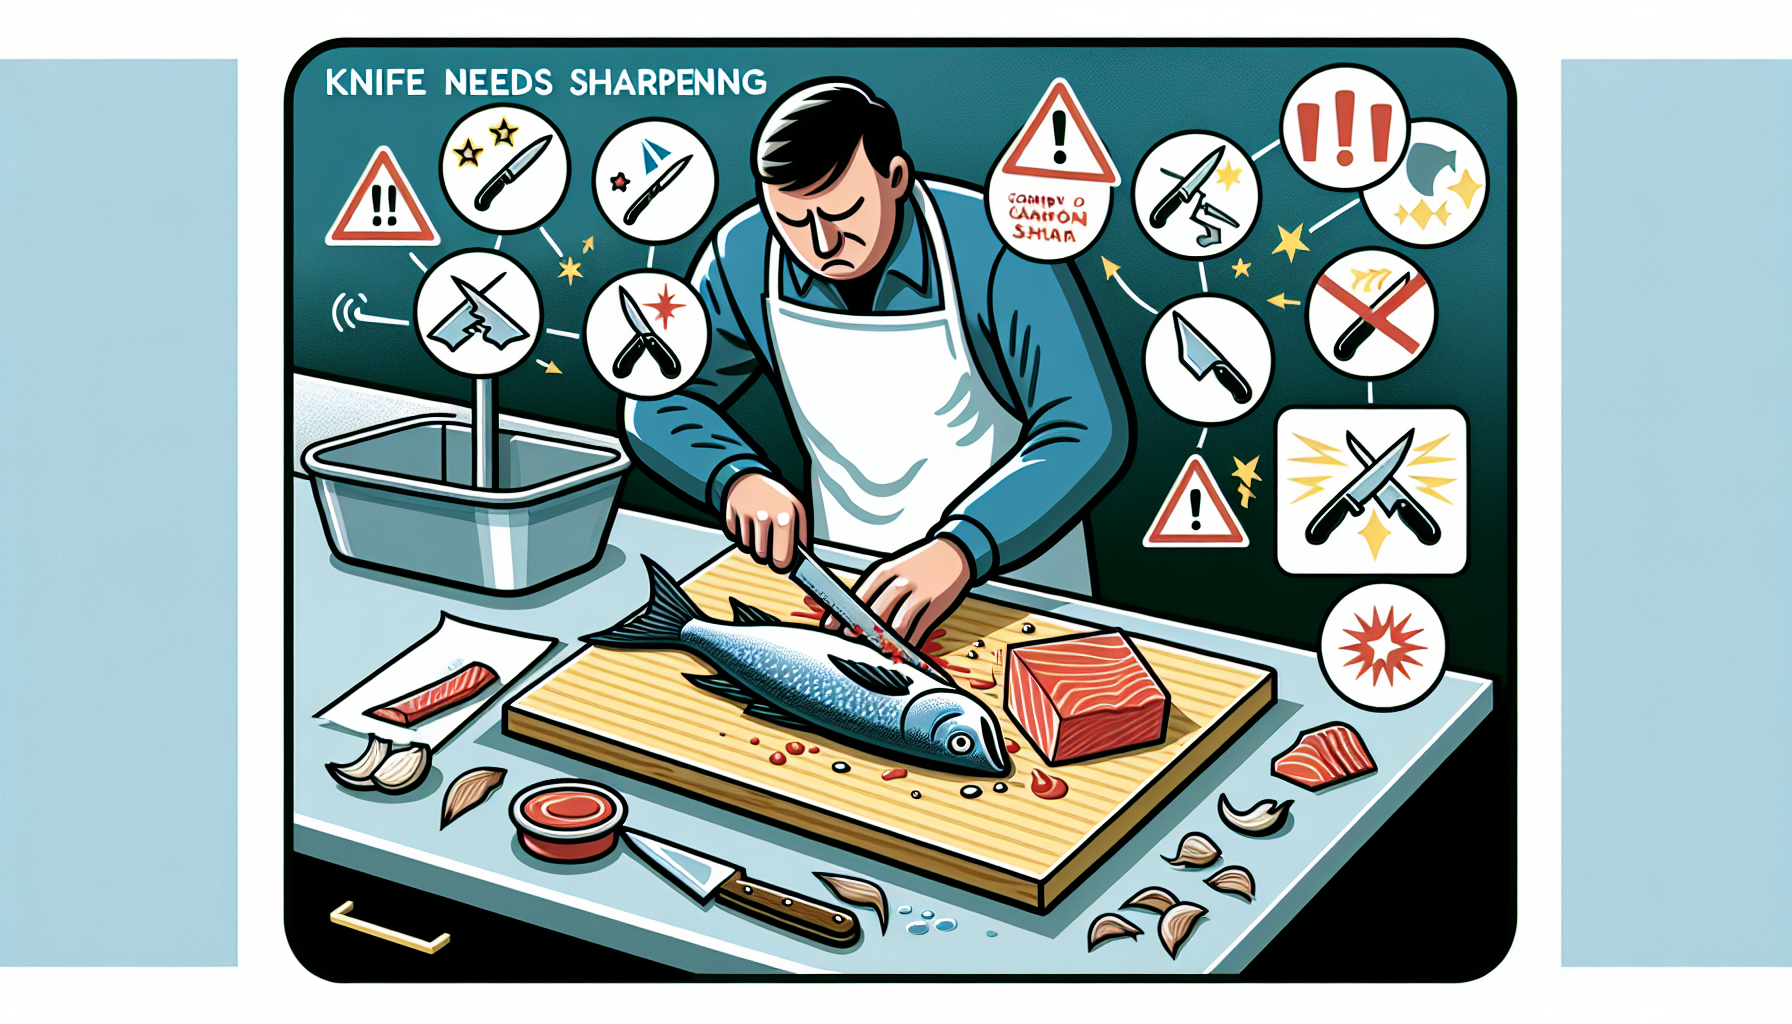 What Are The Signs That A Filleting Knife Needs Sharpening?